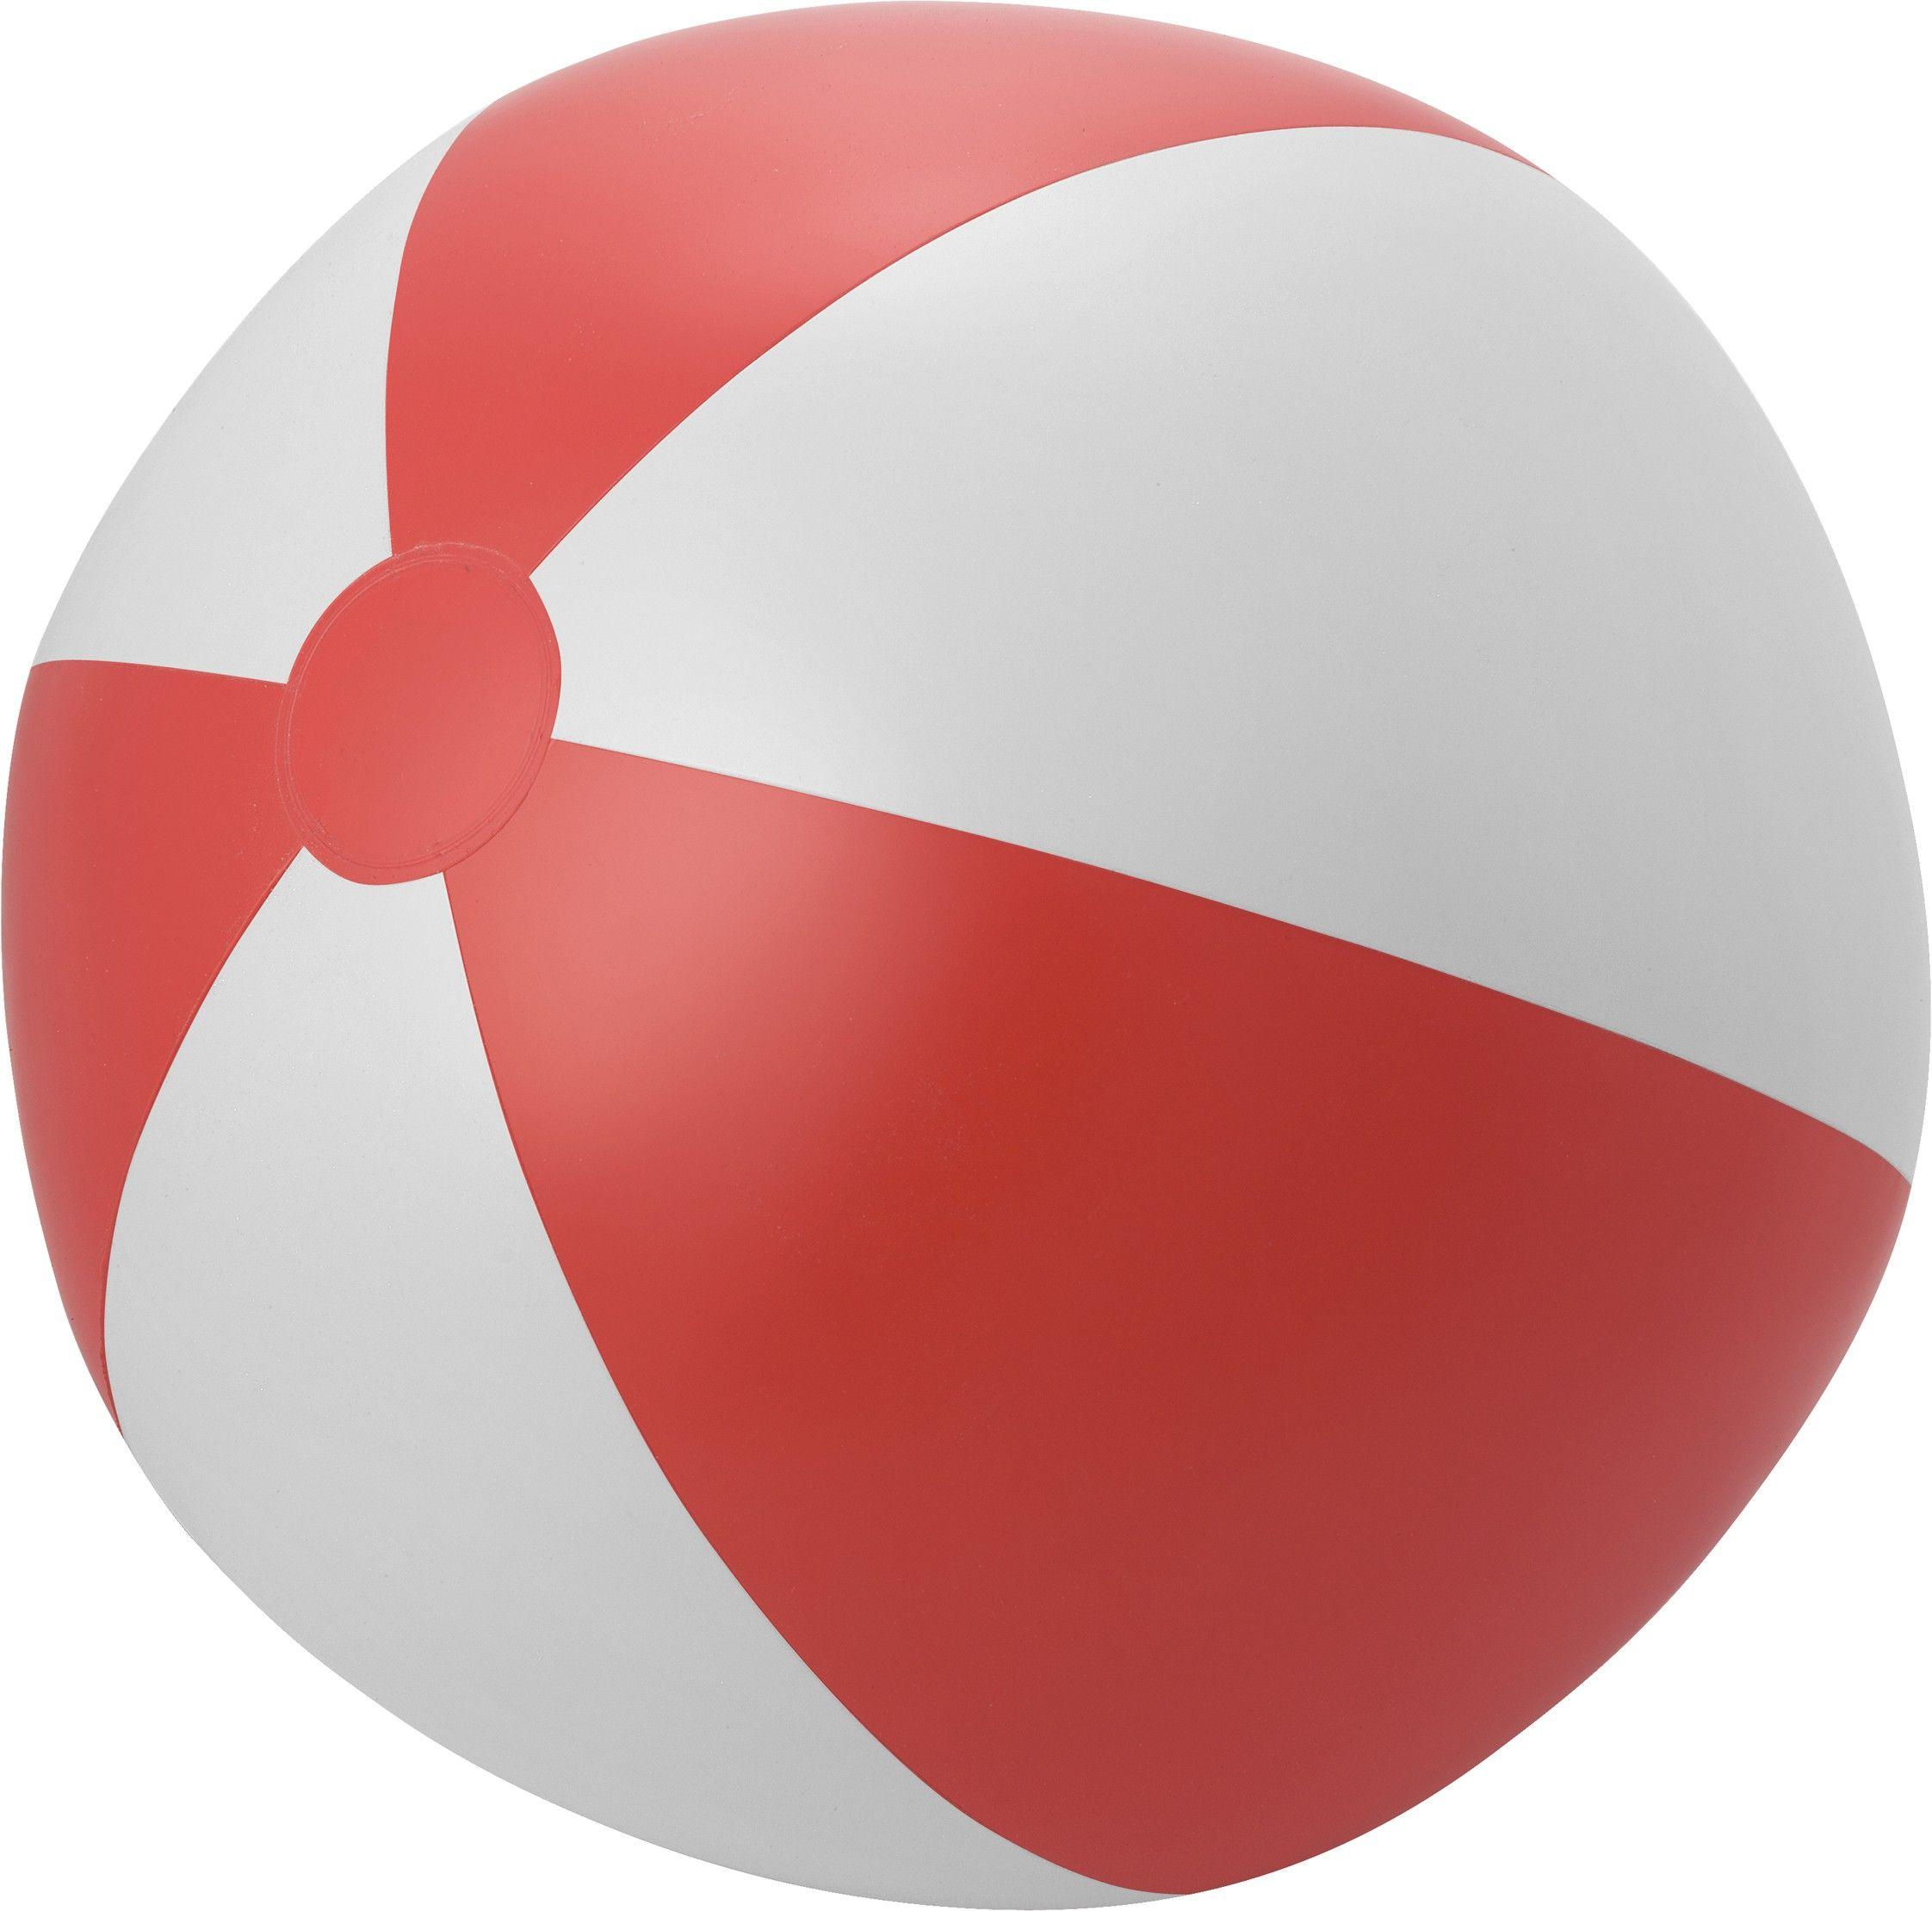 Red and White Sphere Logo - Large PVC Beach Ball., Red White Inflatable Beach Equipment